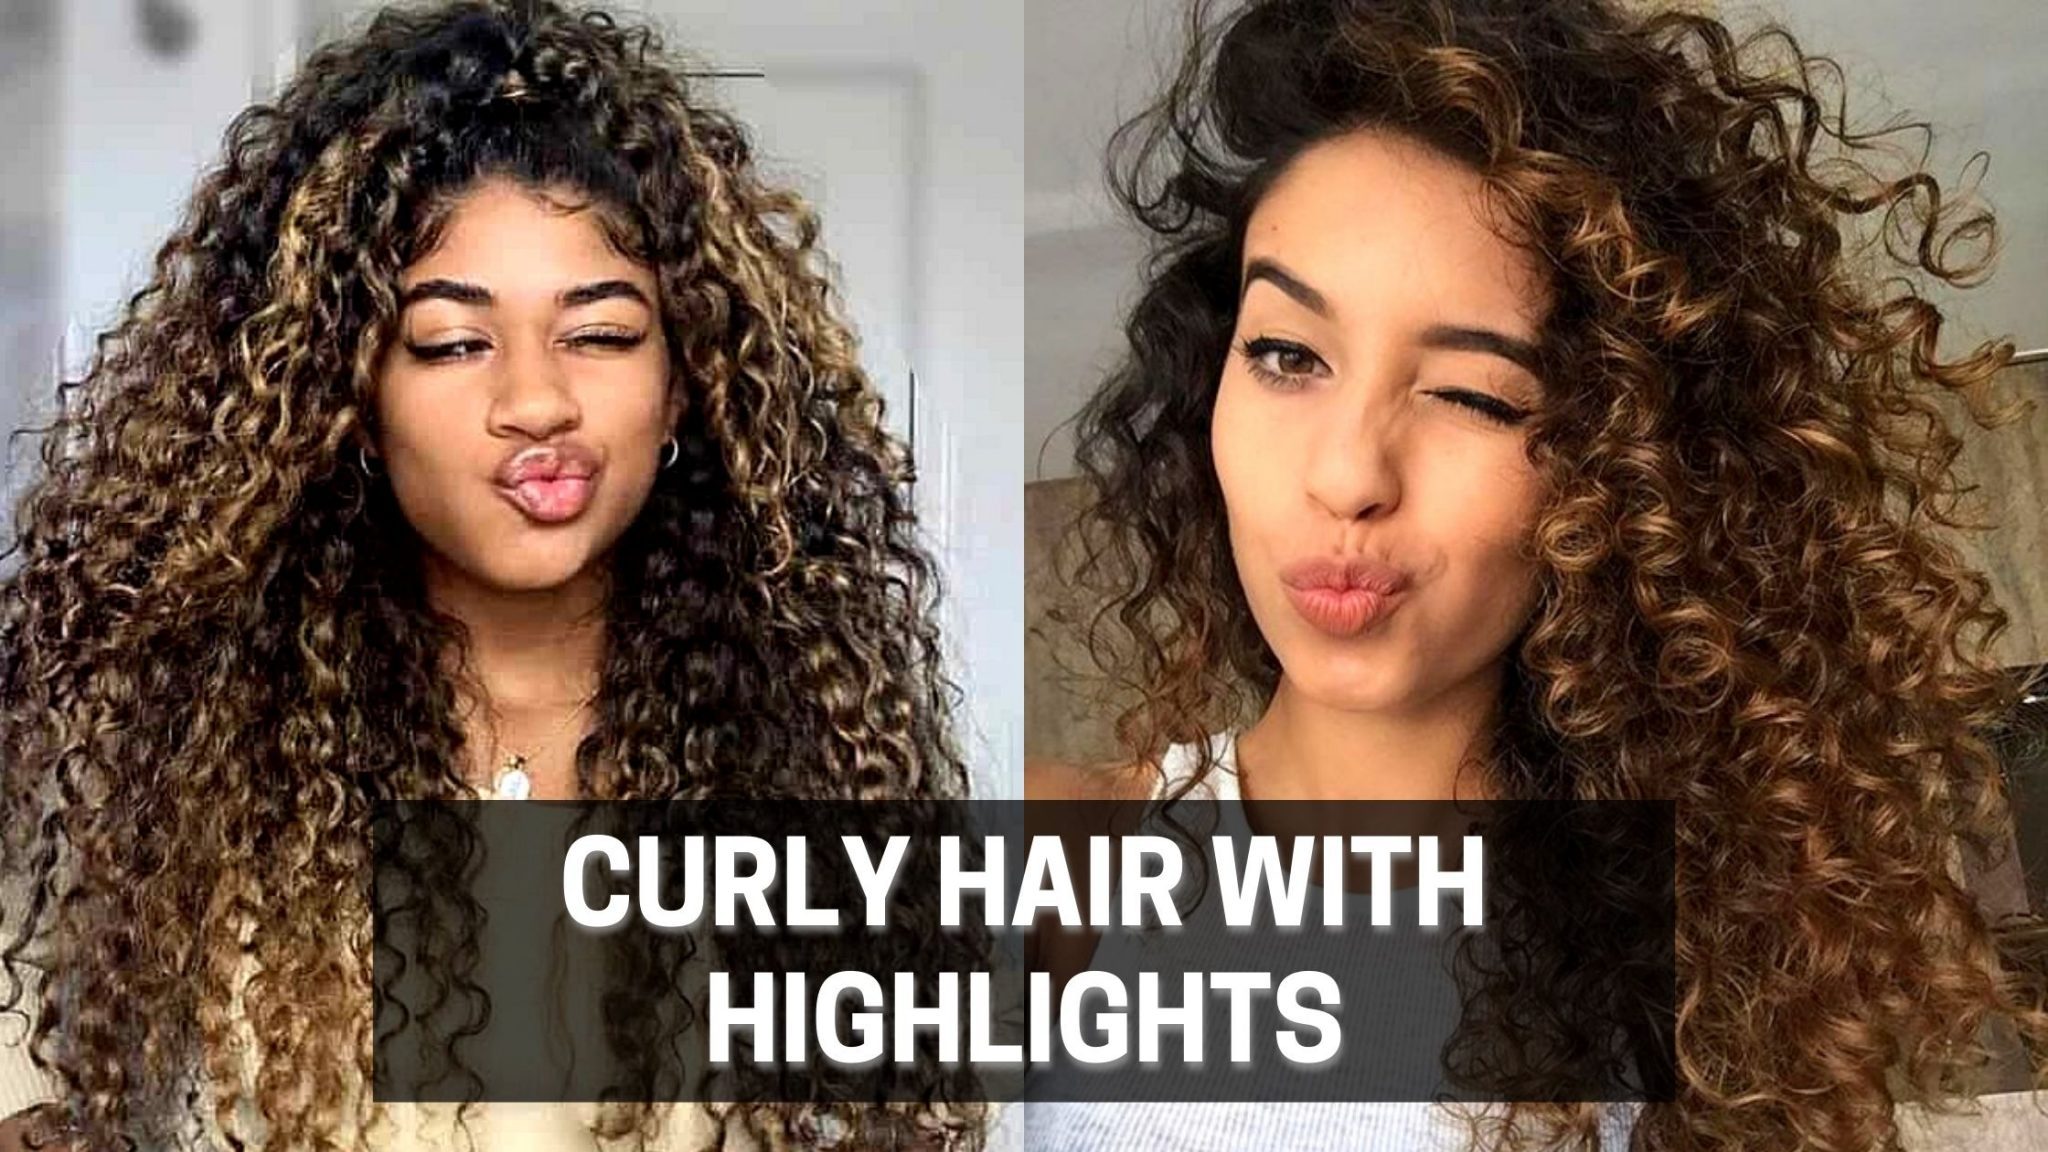 10 Ideas for Curly Hair with Highlights